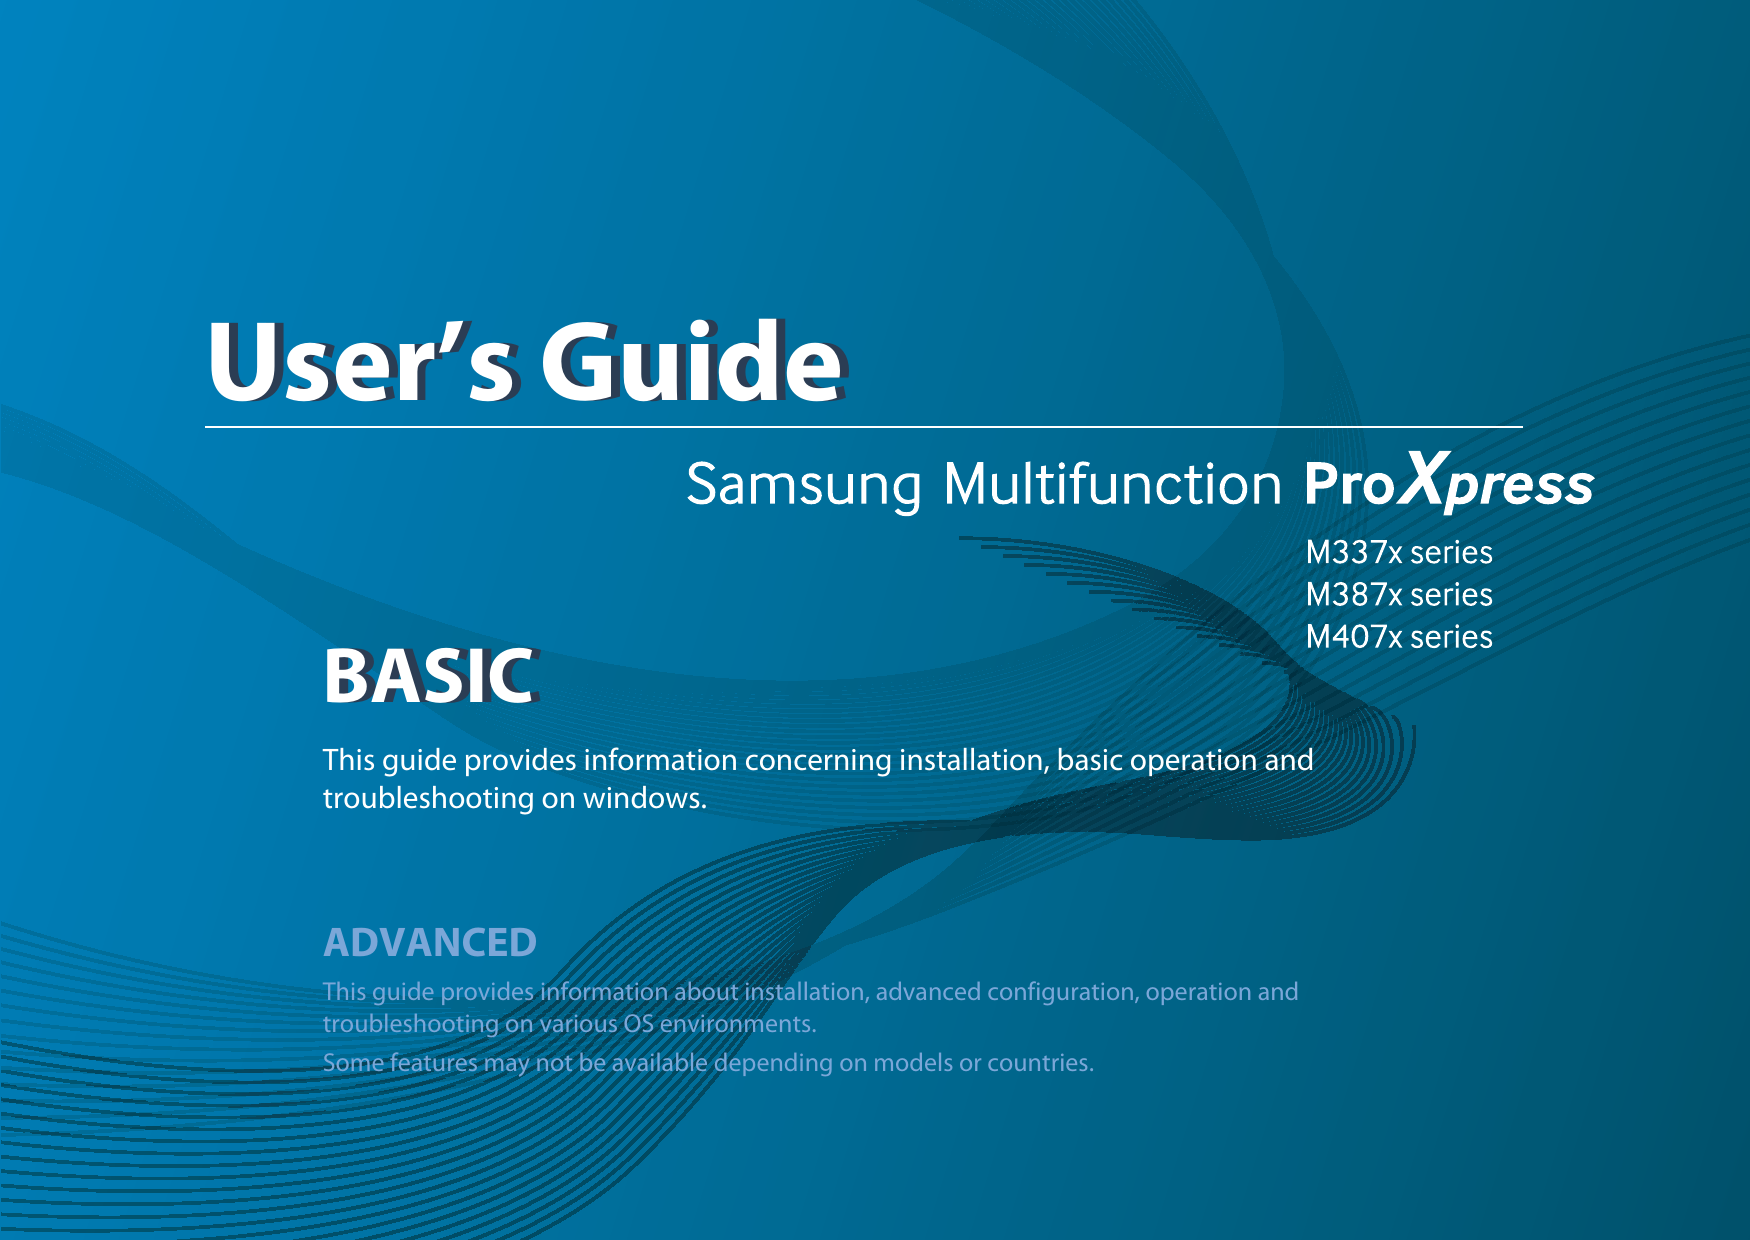 BASICUser’s GuideBASICUser’s GuideThis guide provides information concerning installation, basic operation and troubleshooting on windows.ADVANCEDThis guide provides information about installation, advanced configuration, operation and troubleshooting on various OS environments. Some features may not be available depending on models or countries.